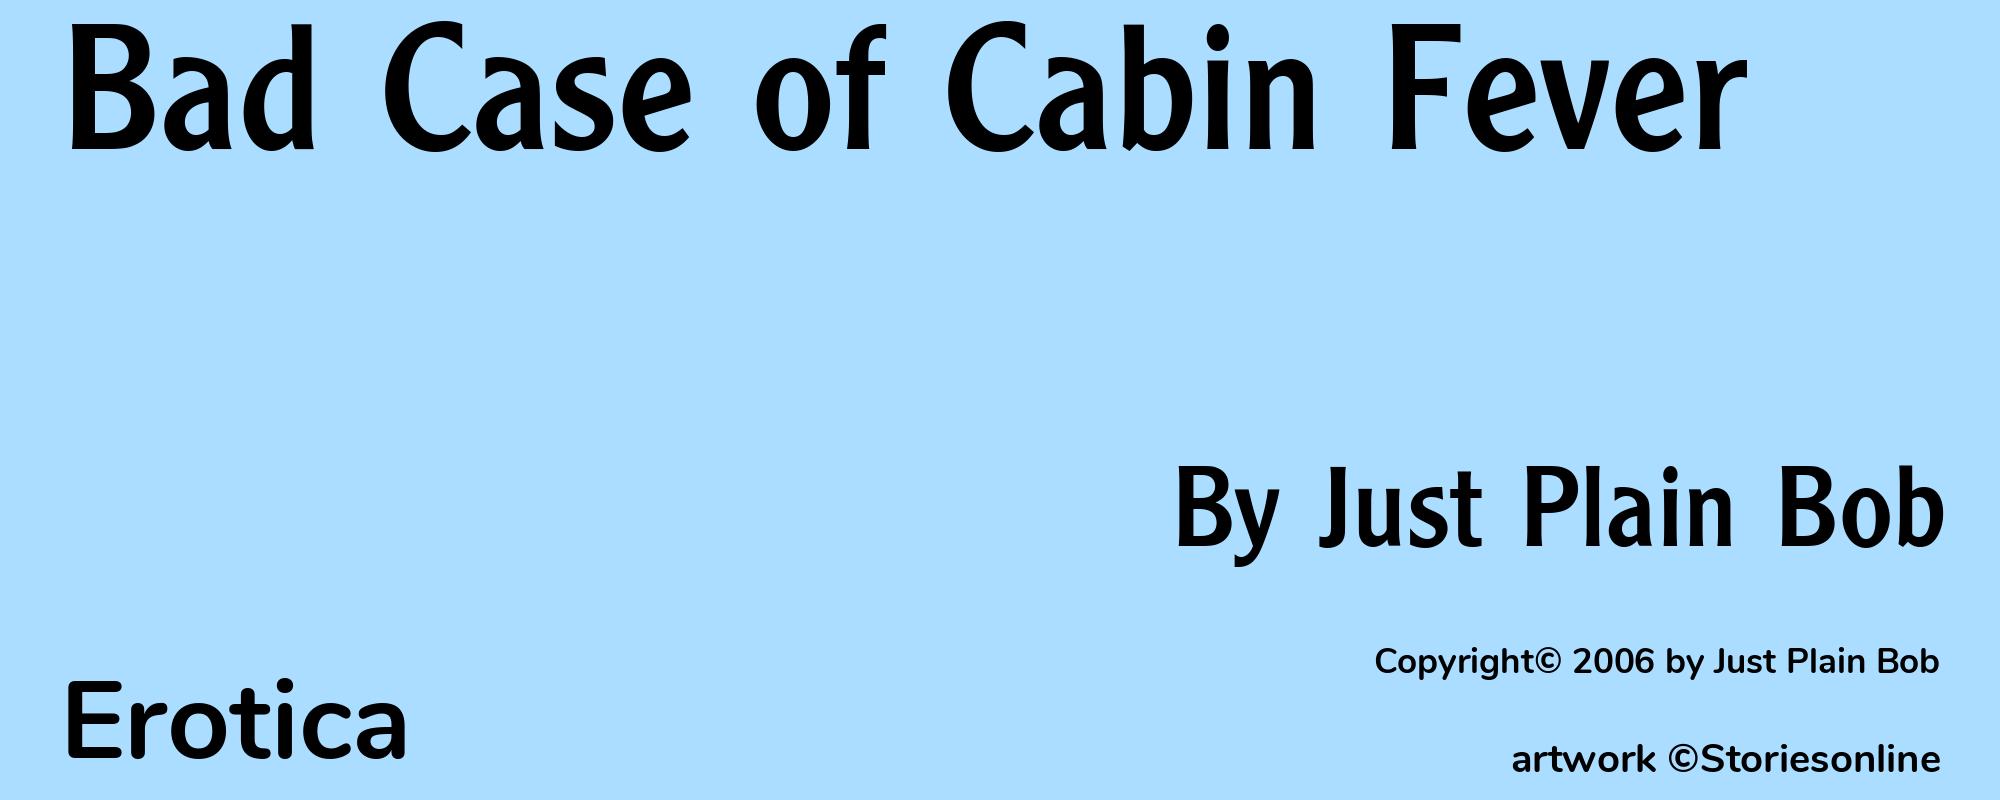 Bad Case of Cabin Fever - Cover